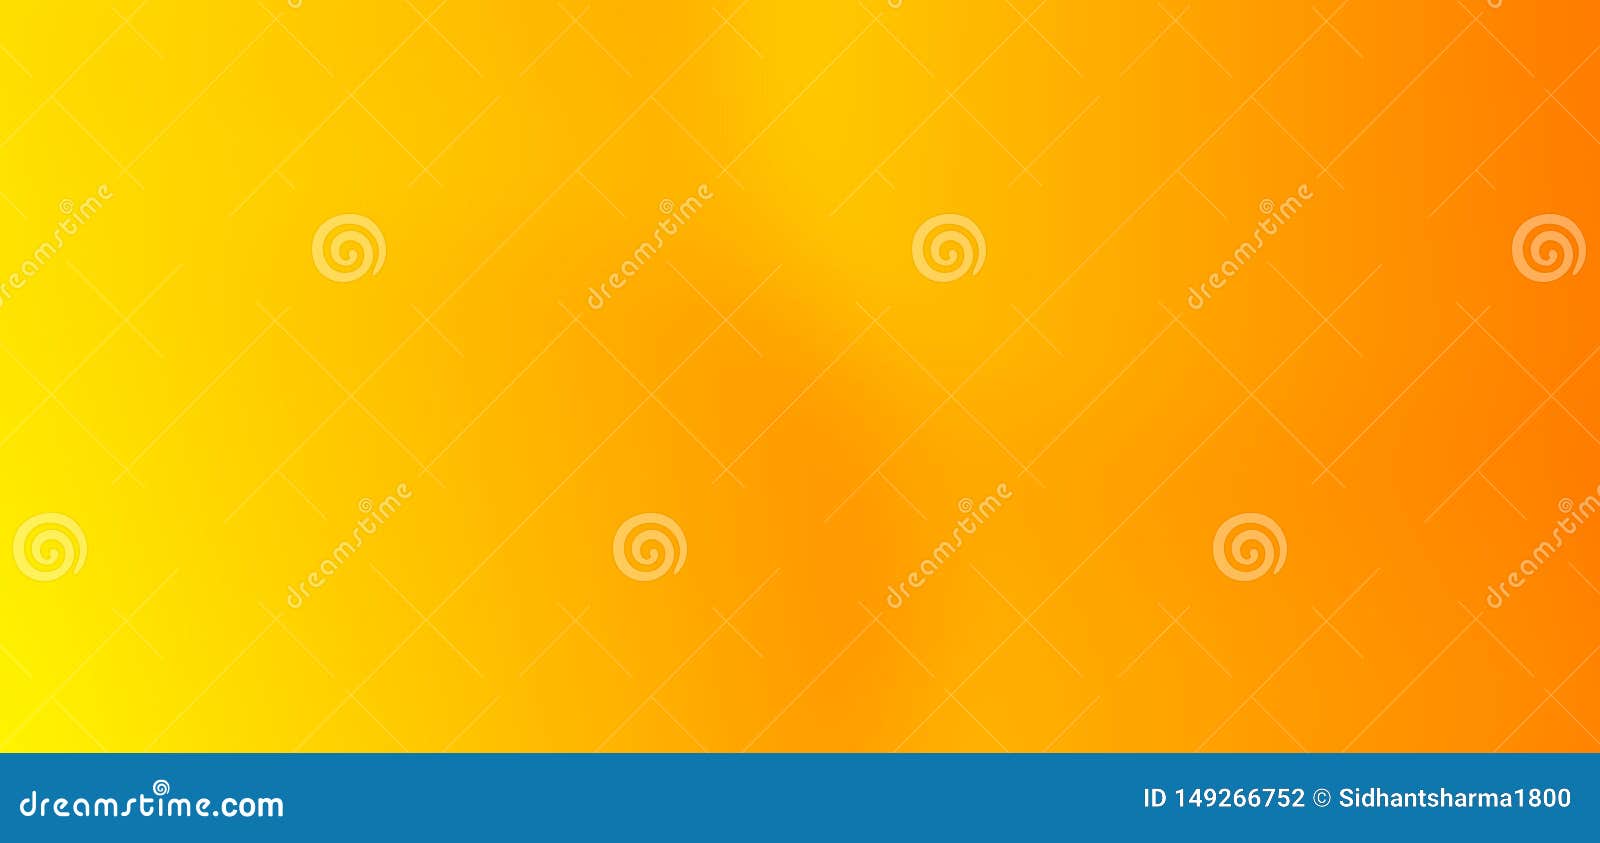 colorful abstract yellow with orange multi colors blurred shaded background.